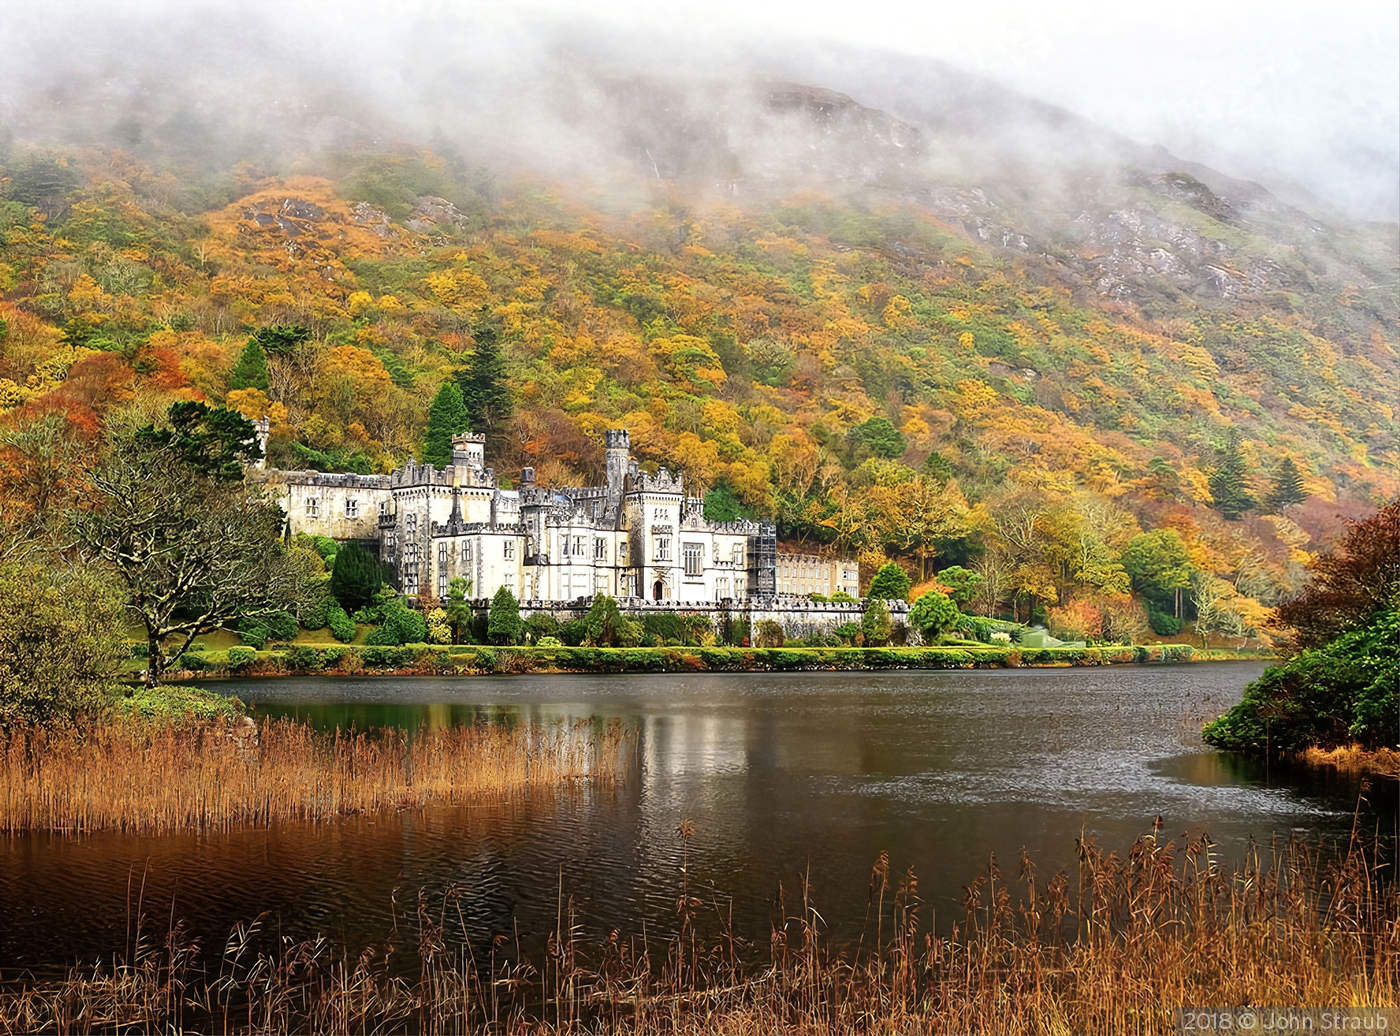 Kylemore Abbey Emerges from the Fog by John Straub